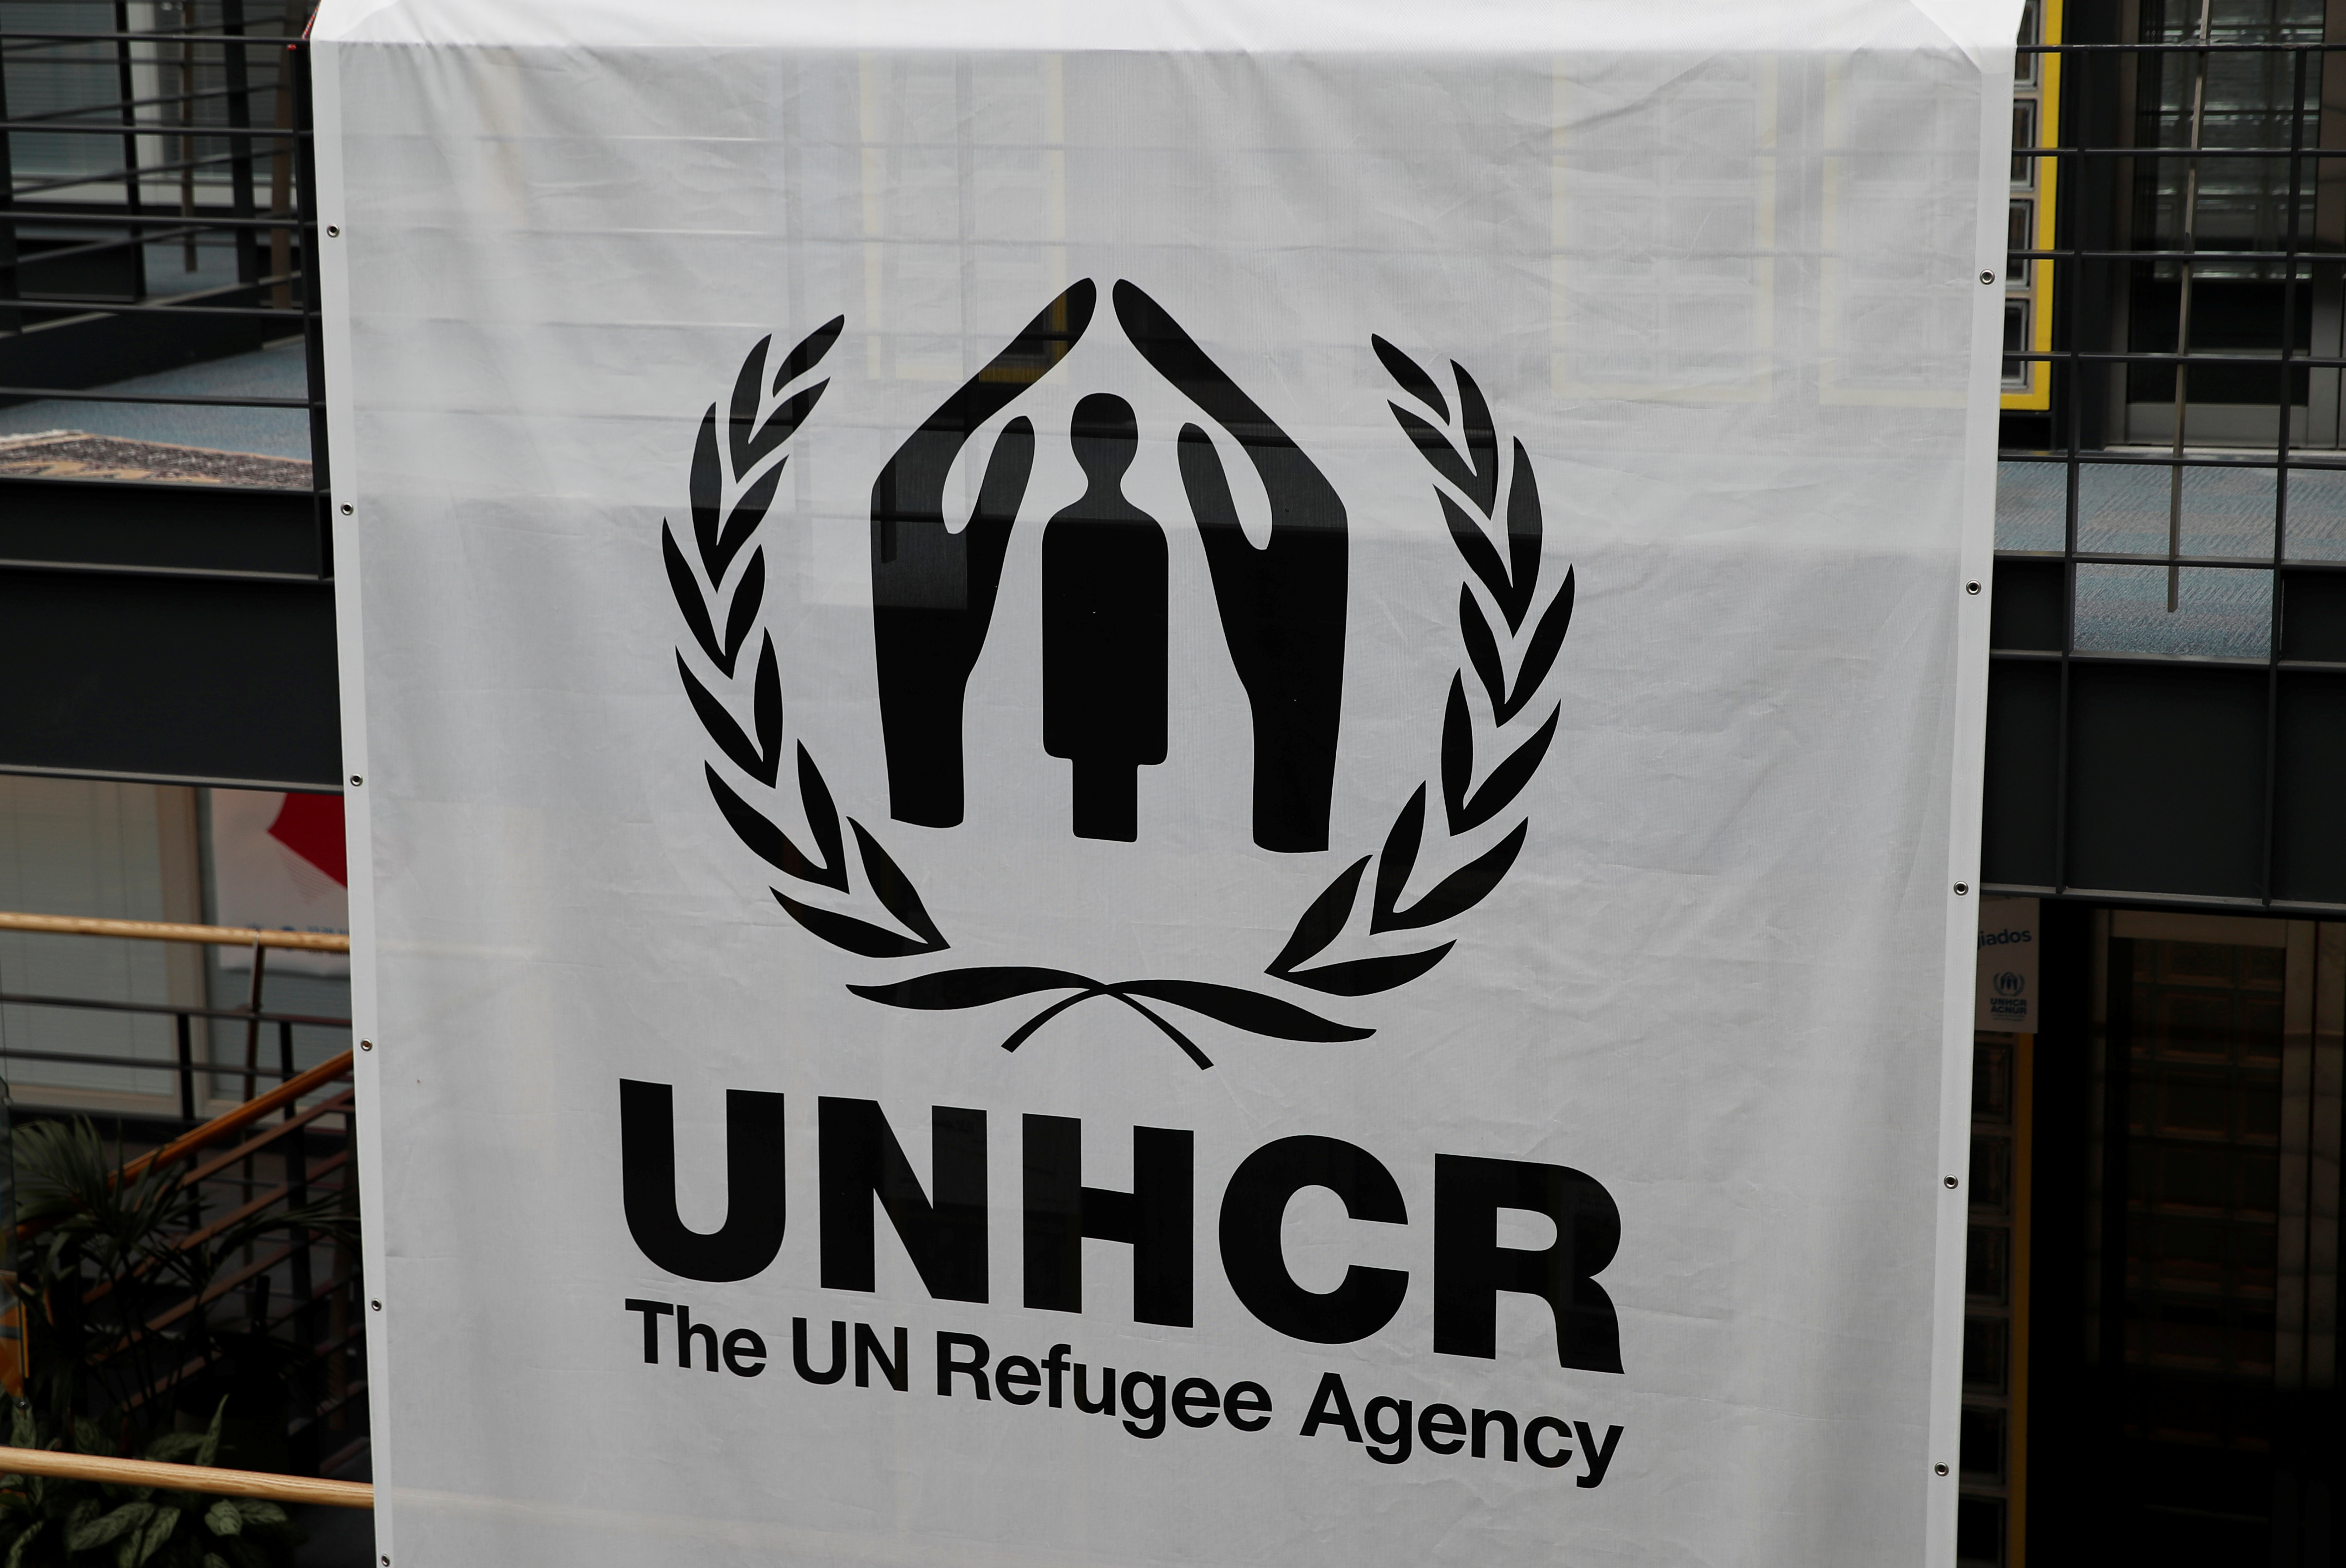 A logo is pictured on a banner at the UNHCR headquarters in Geneva